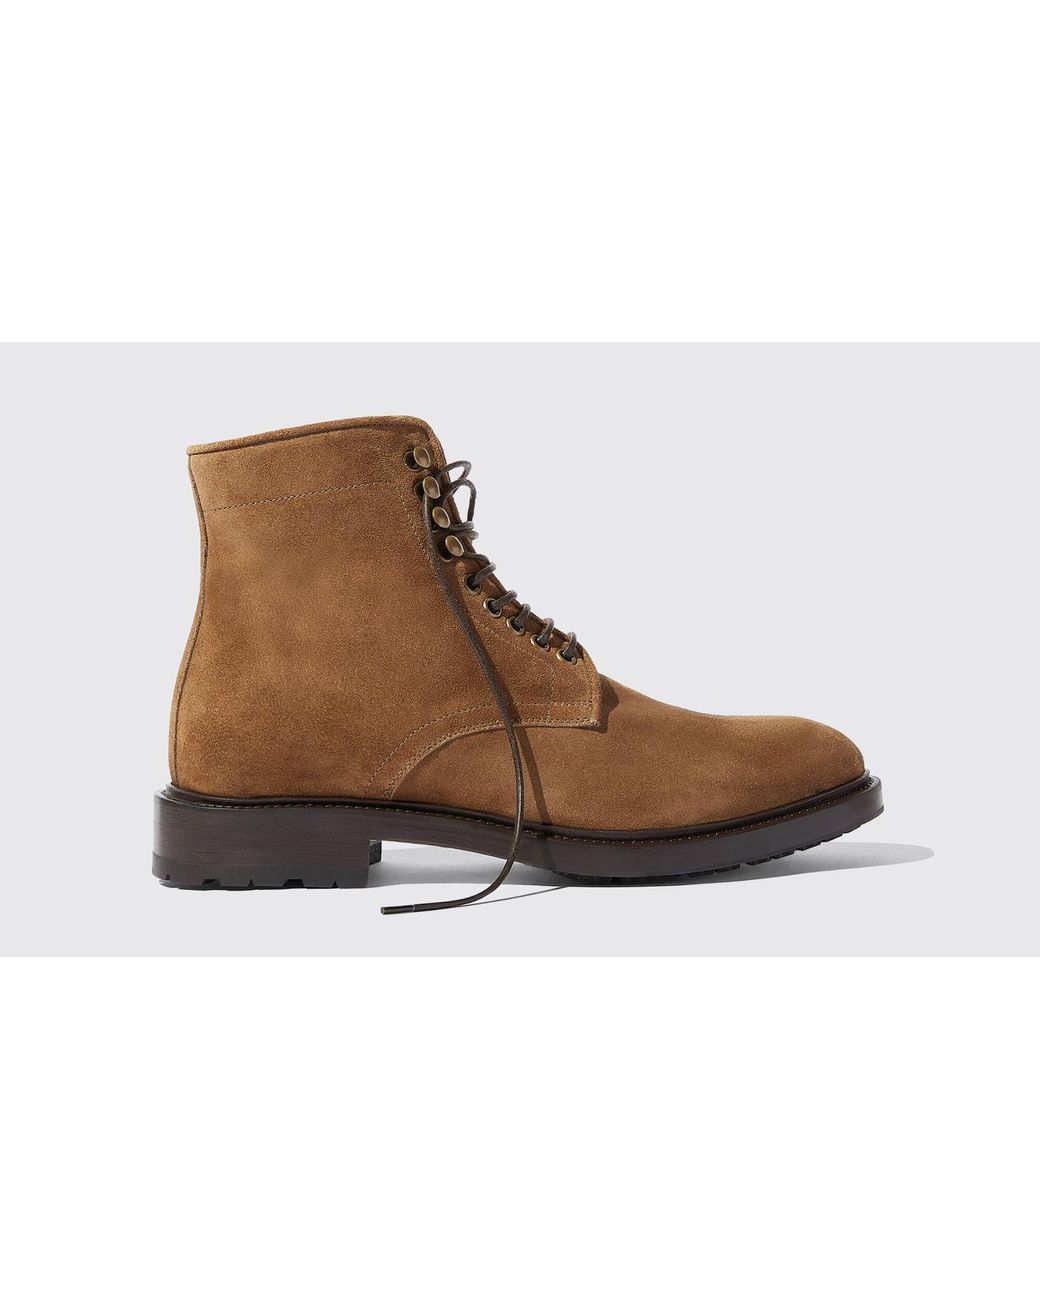 SCAROSSO Boots William Ii Tan Suede Suede Leather in Tan - Suede (Brown)  for Men - Lyst